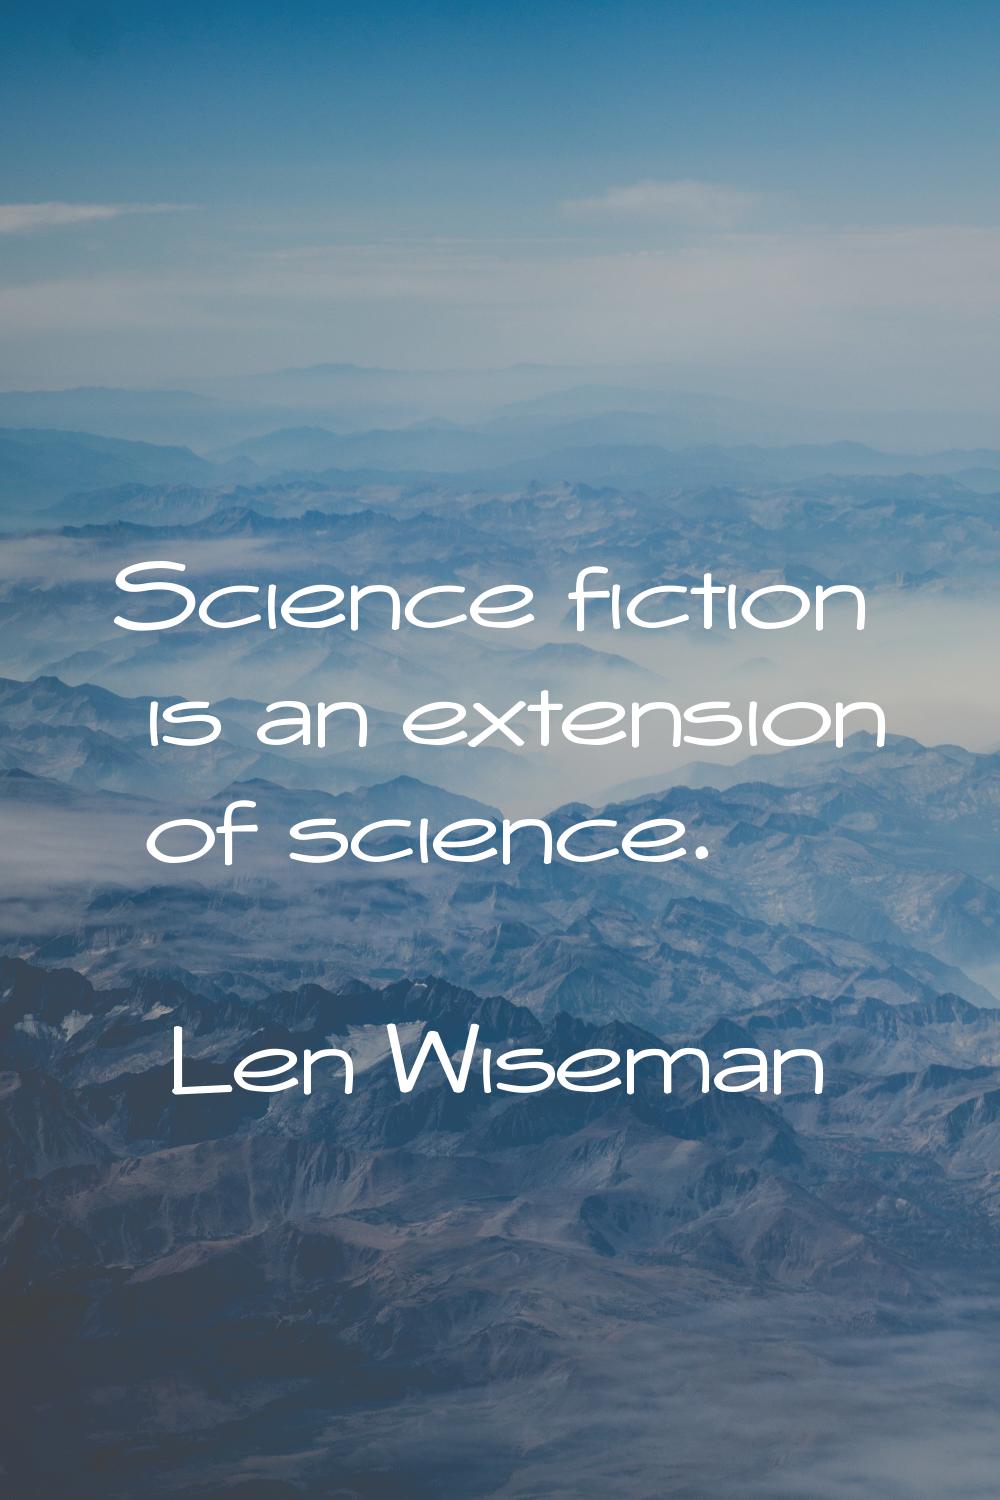 Science fiction is an extension of science.